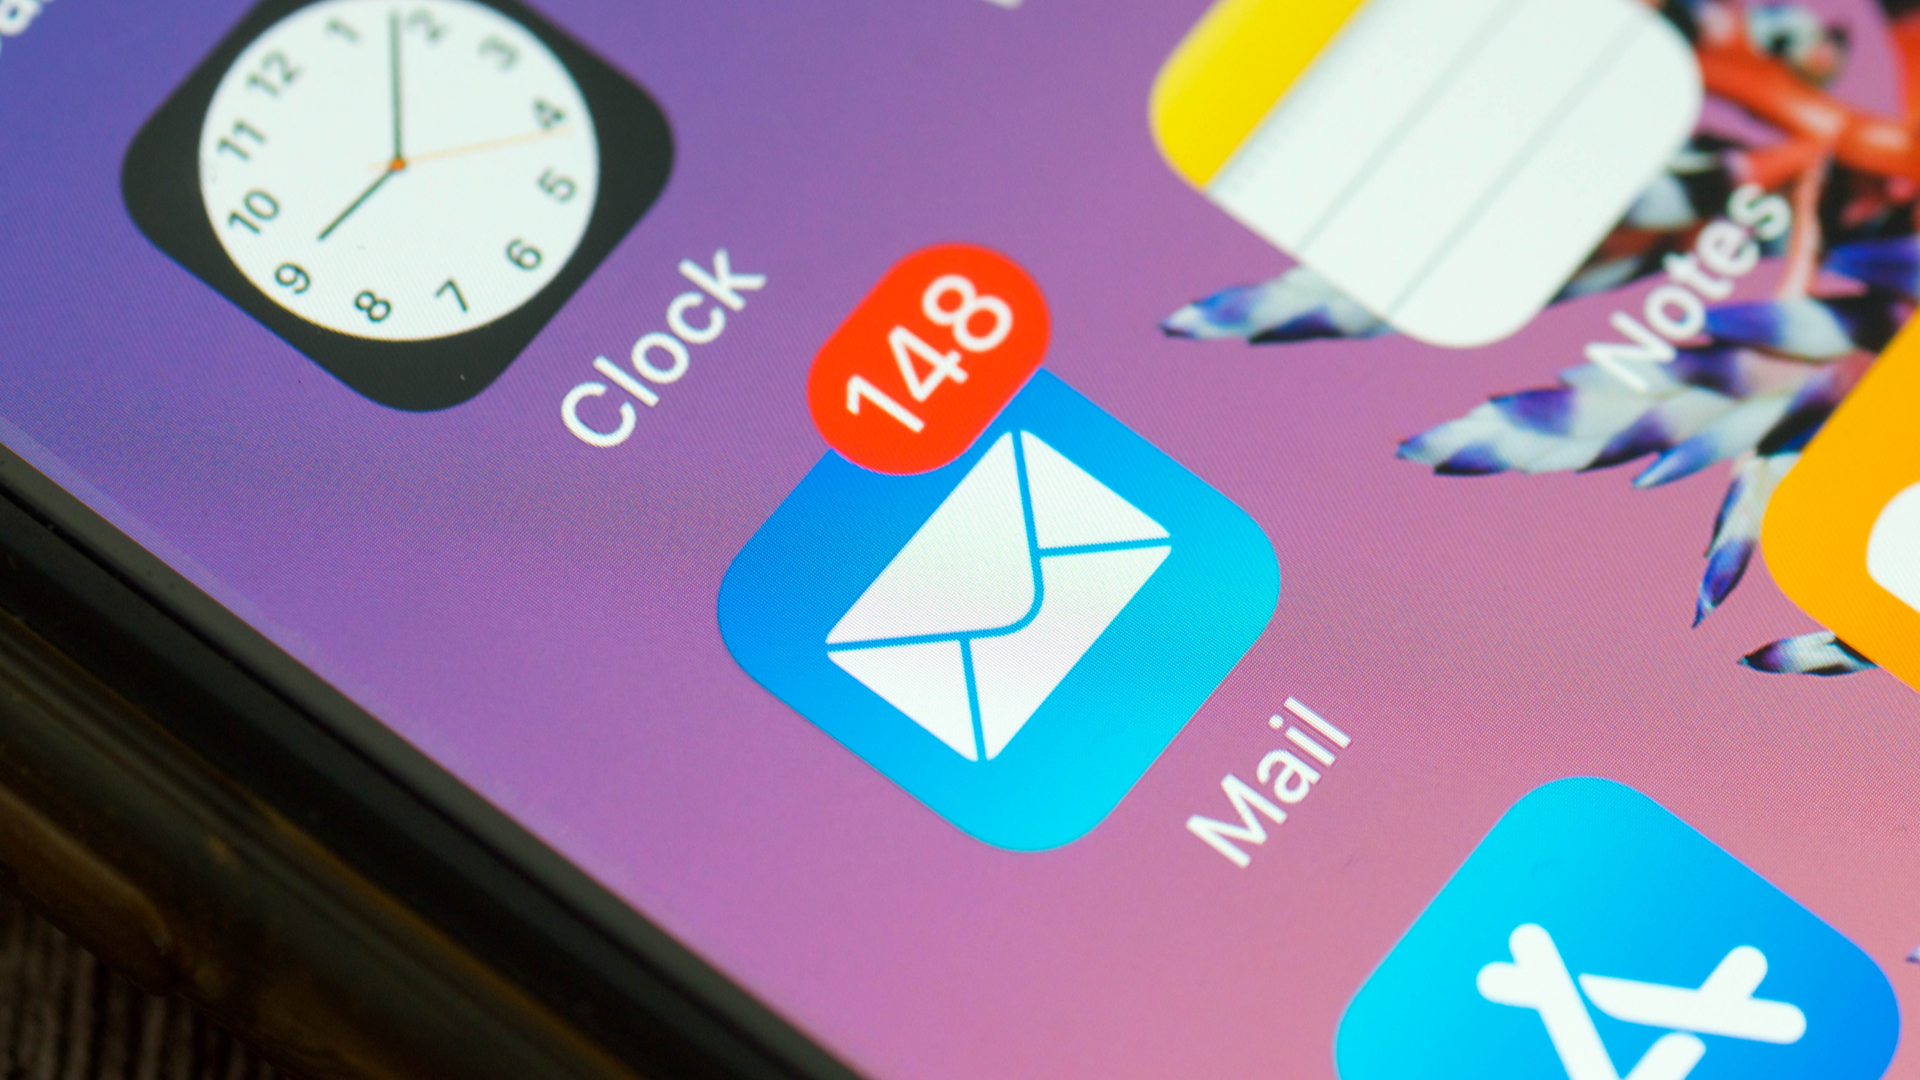 You Don't Need iCloud+ for 'Hide My Email' in iOS 15